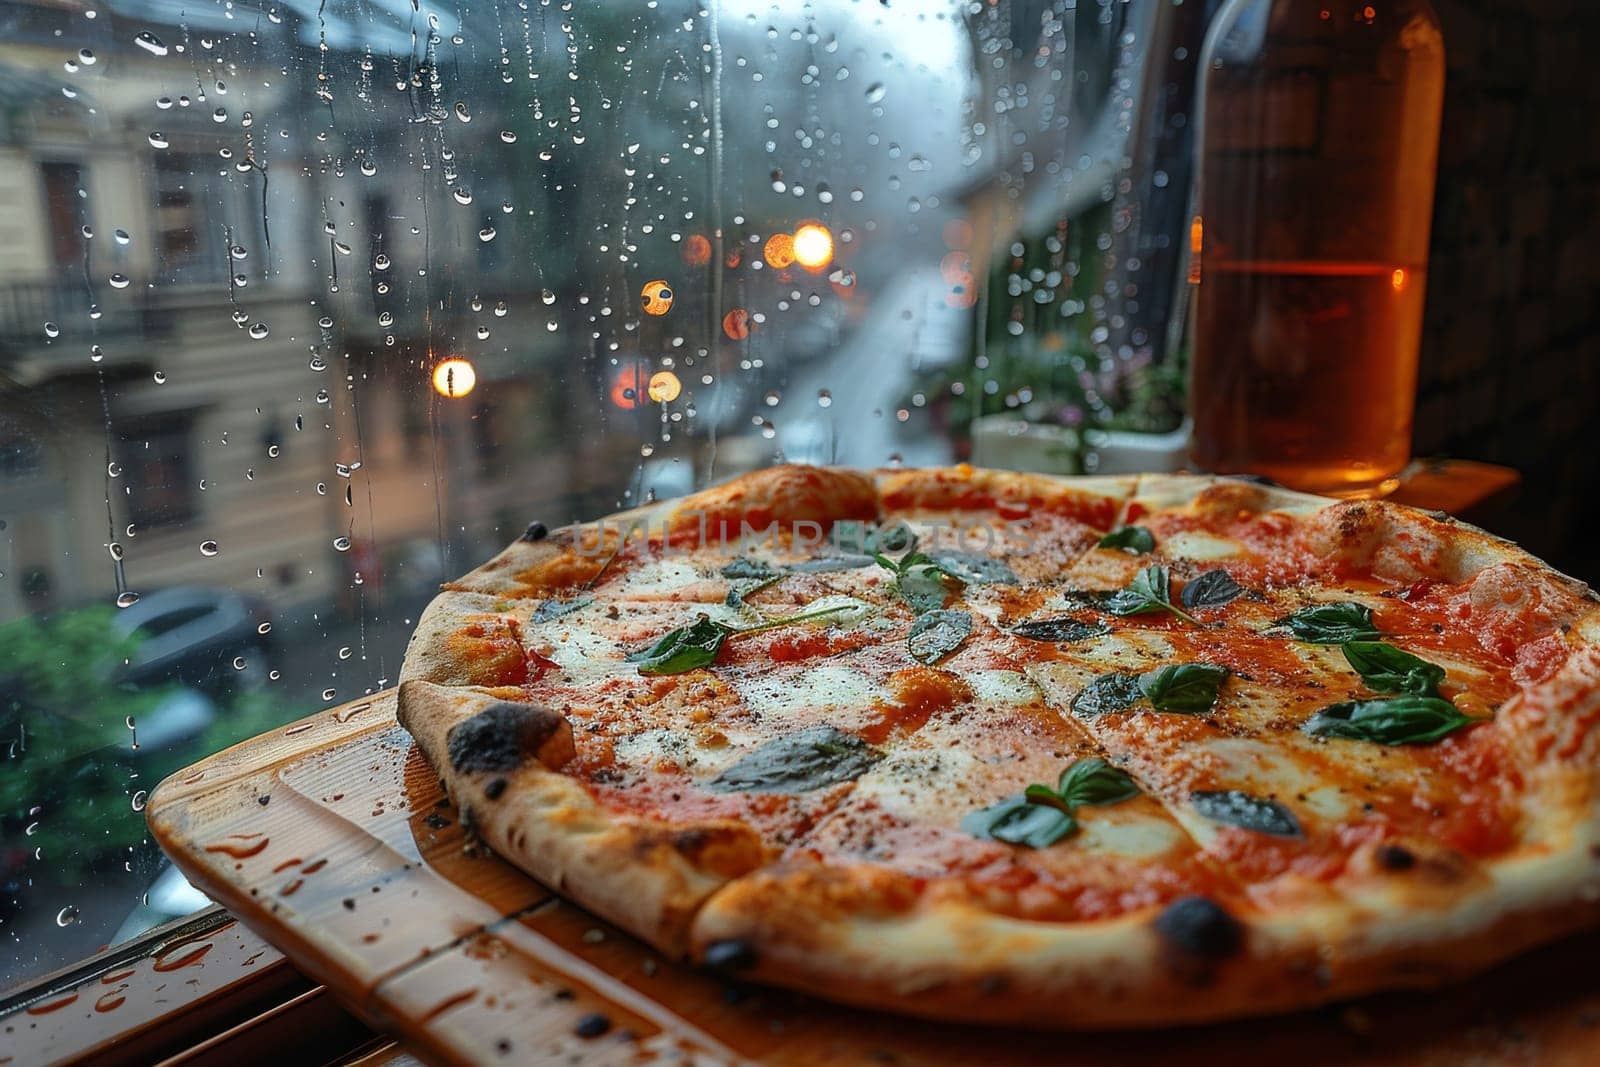 A pizza with basil and cheese sits on a wooden board in front of a window by itchaznong